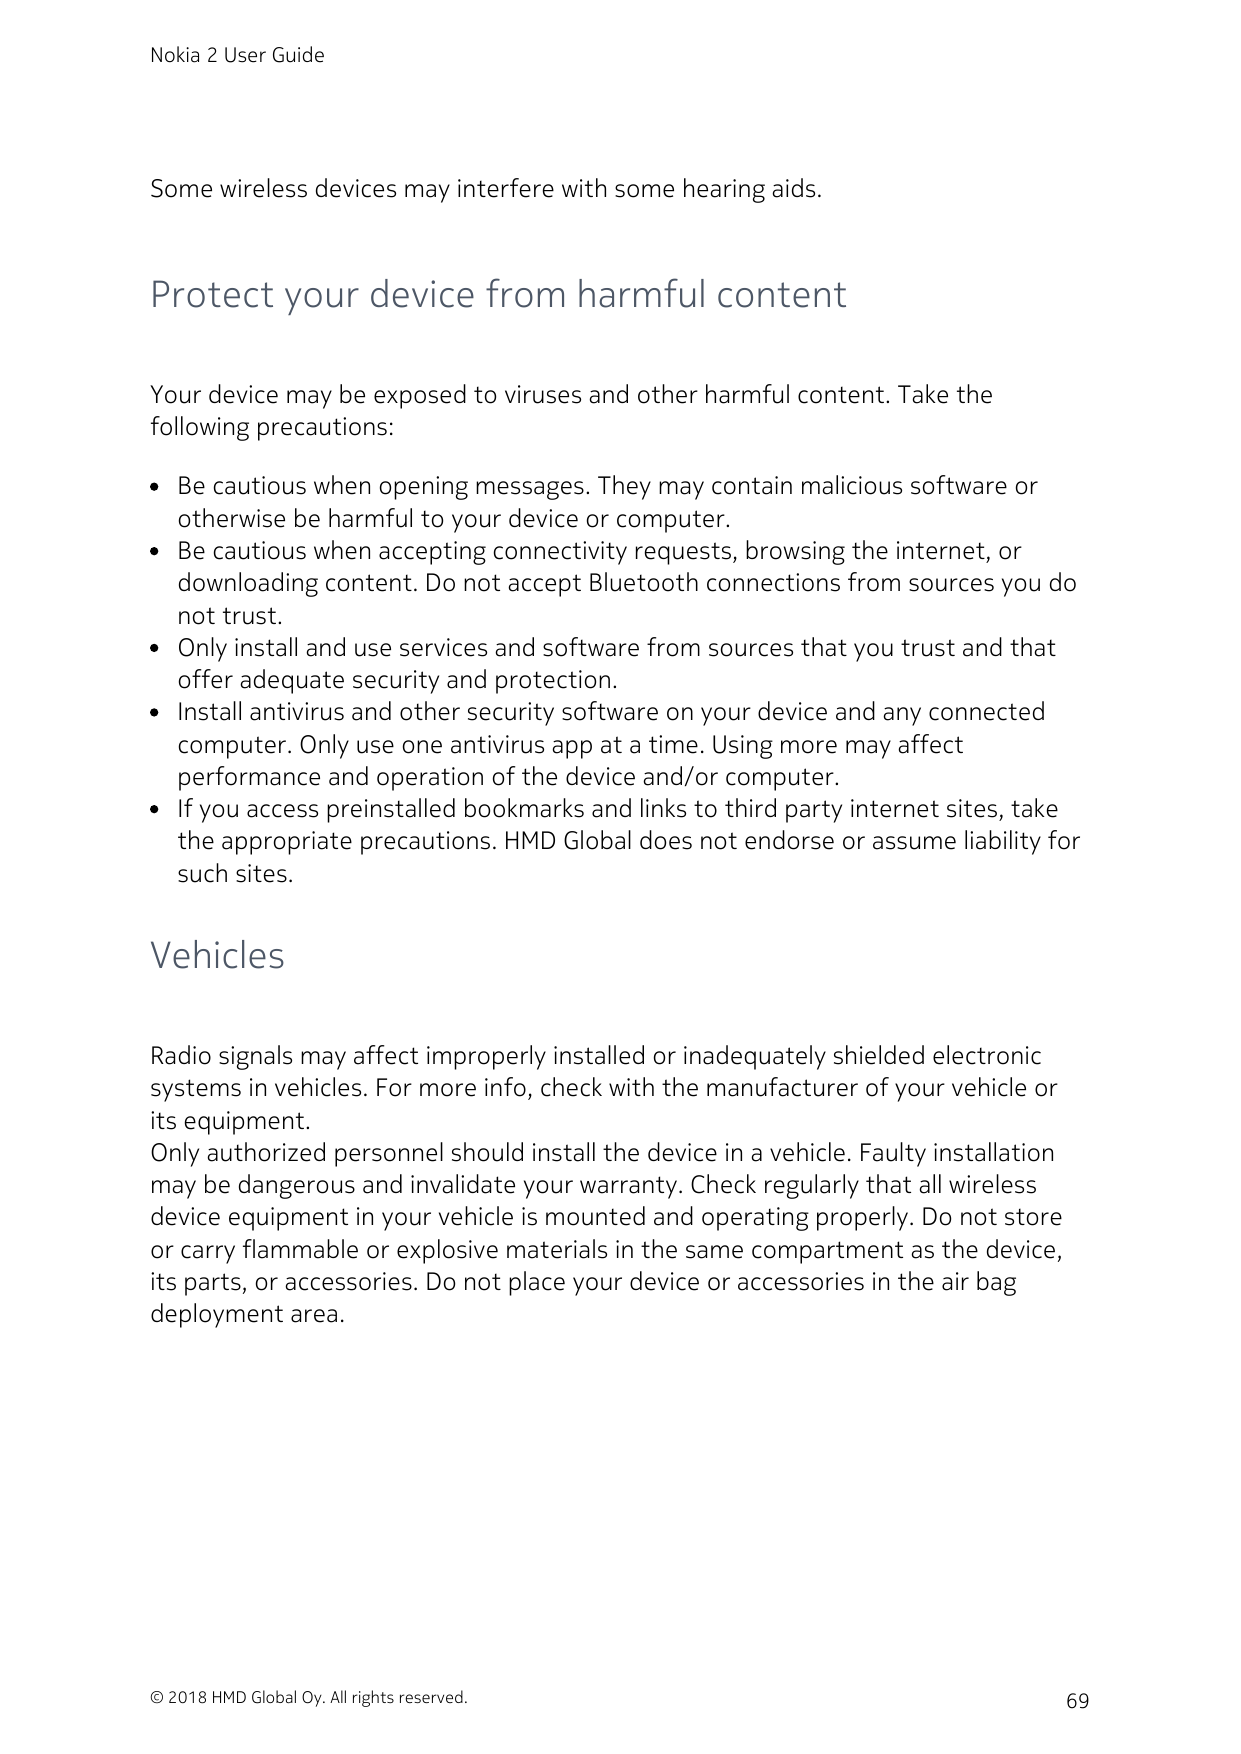 Nokia 2 User GuideSome wireless devices may interfere with some hearing aids.Protect your device from harmful contentYour device